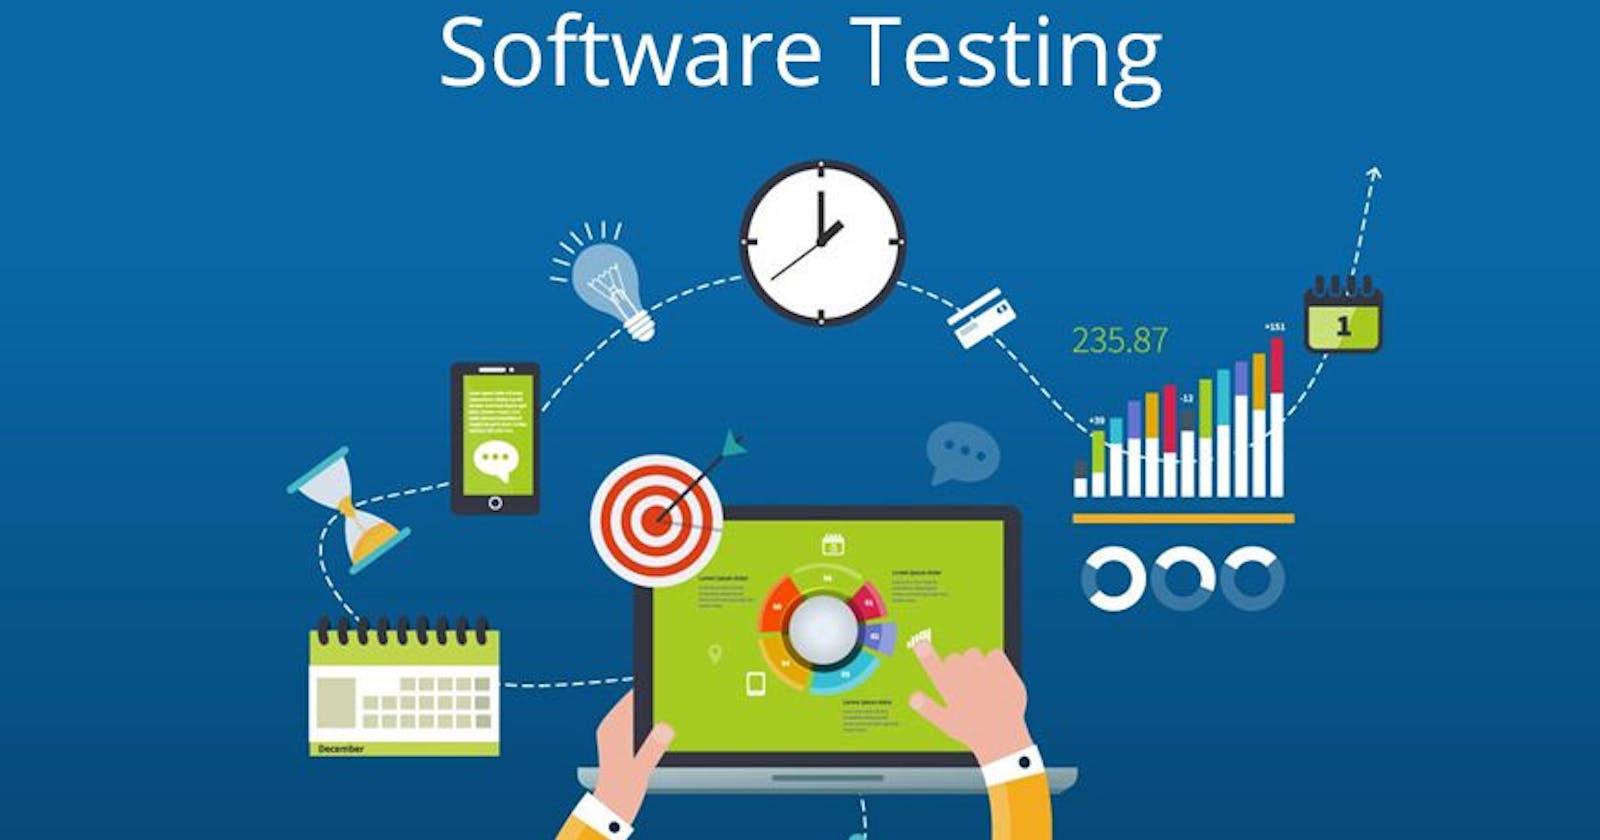 What is software testing? Why do we need it?